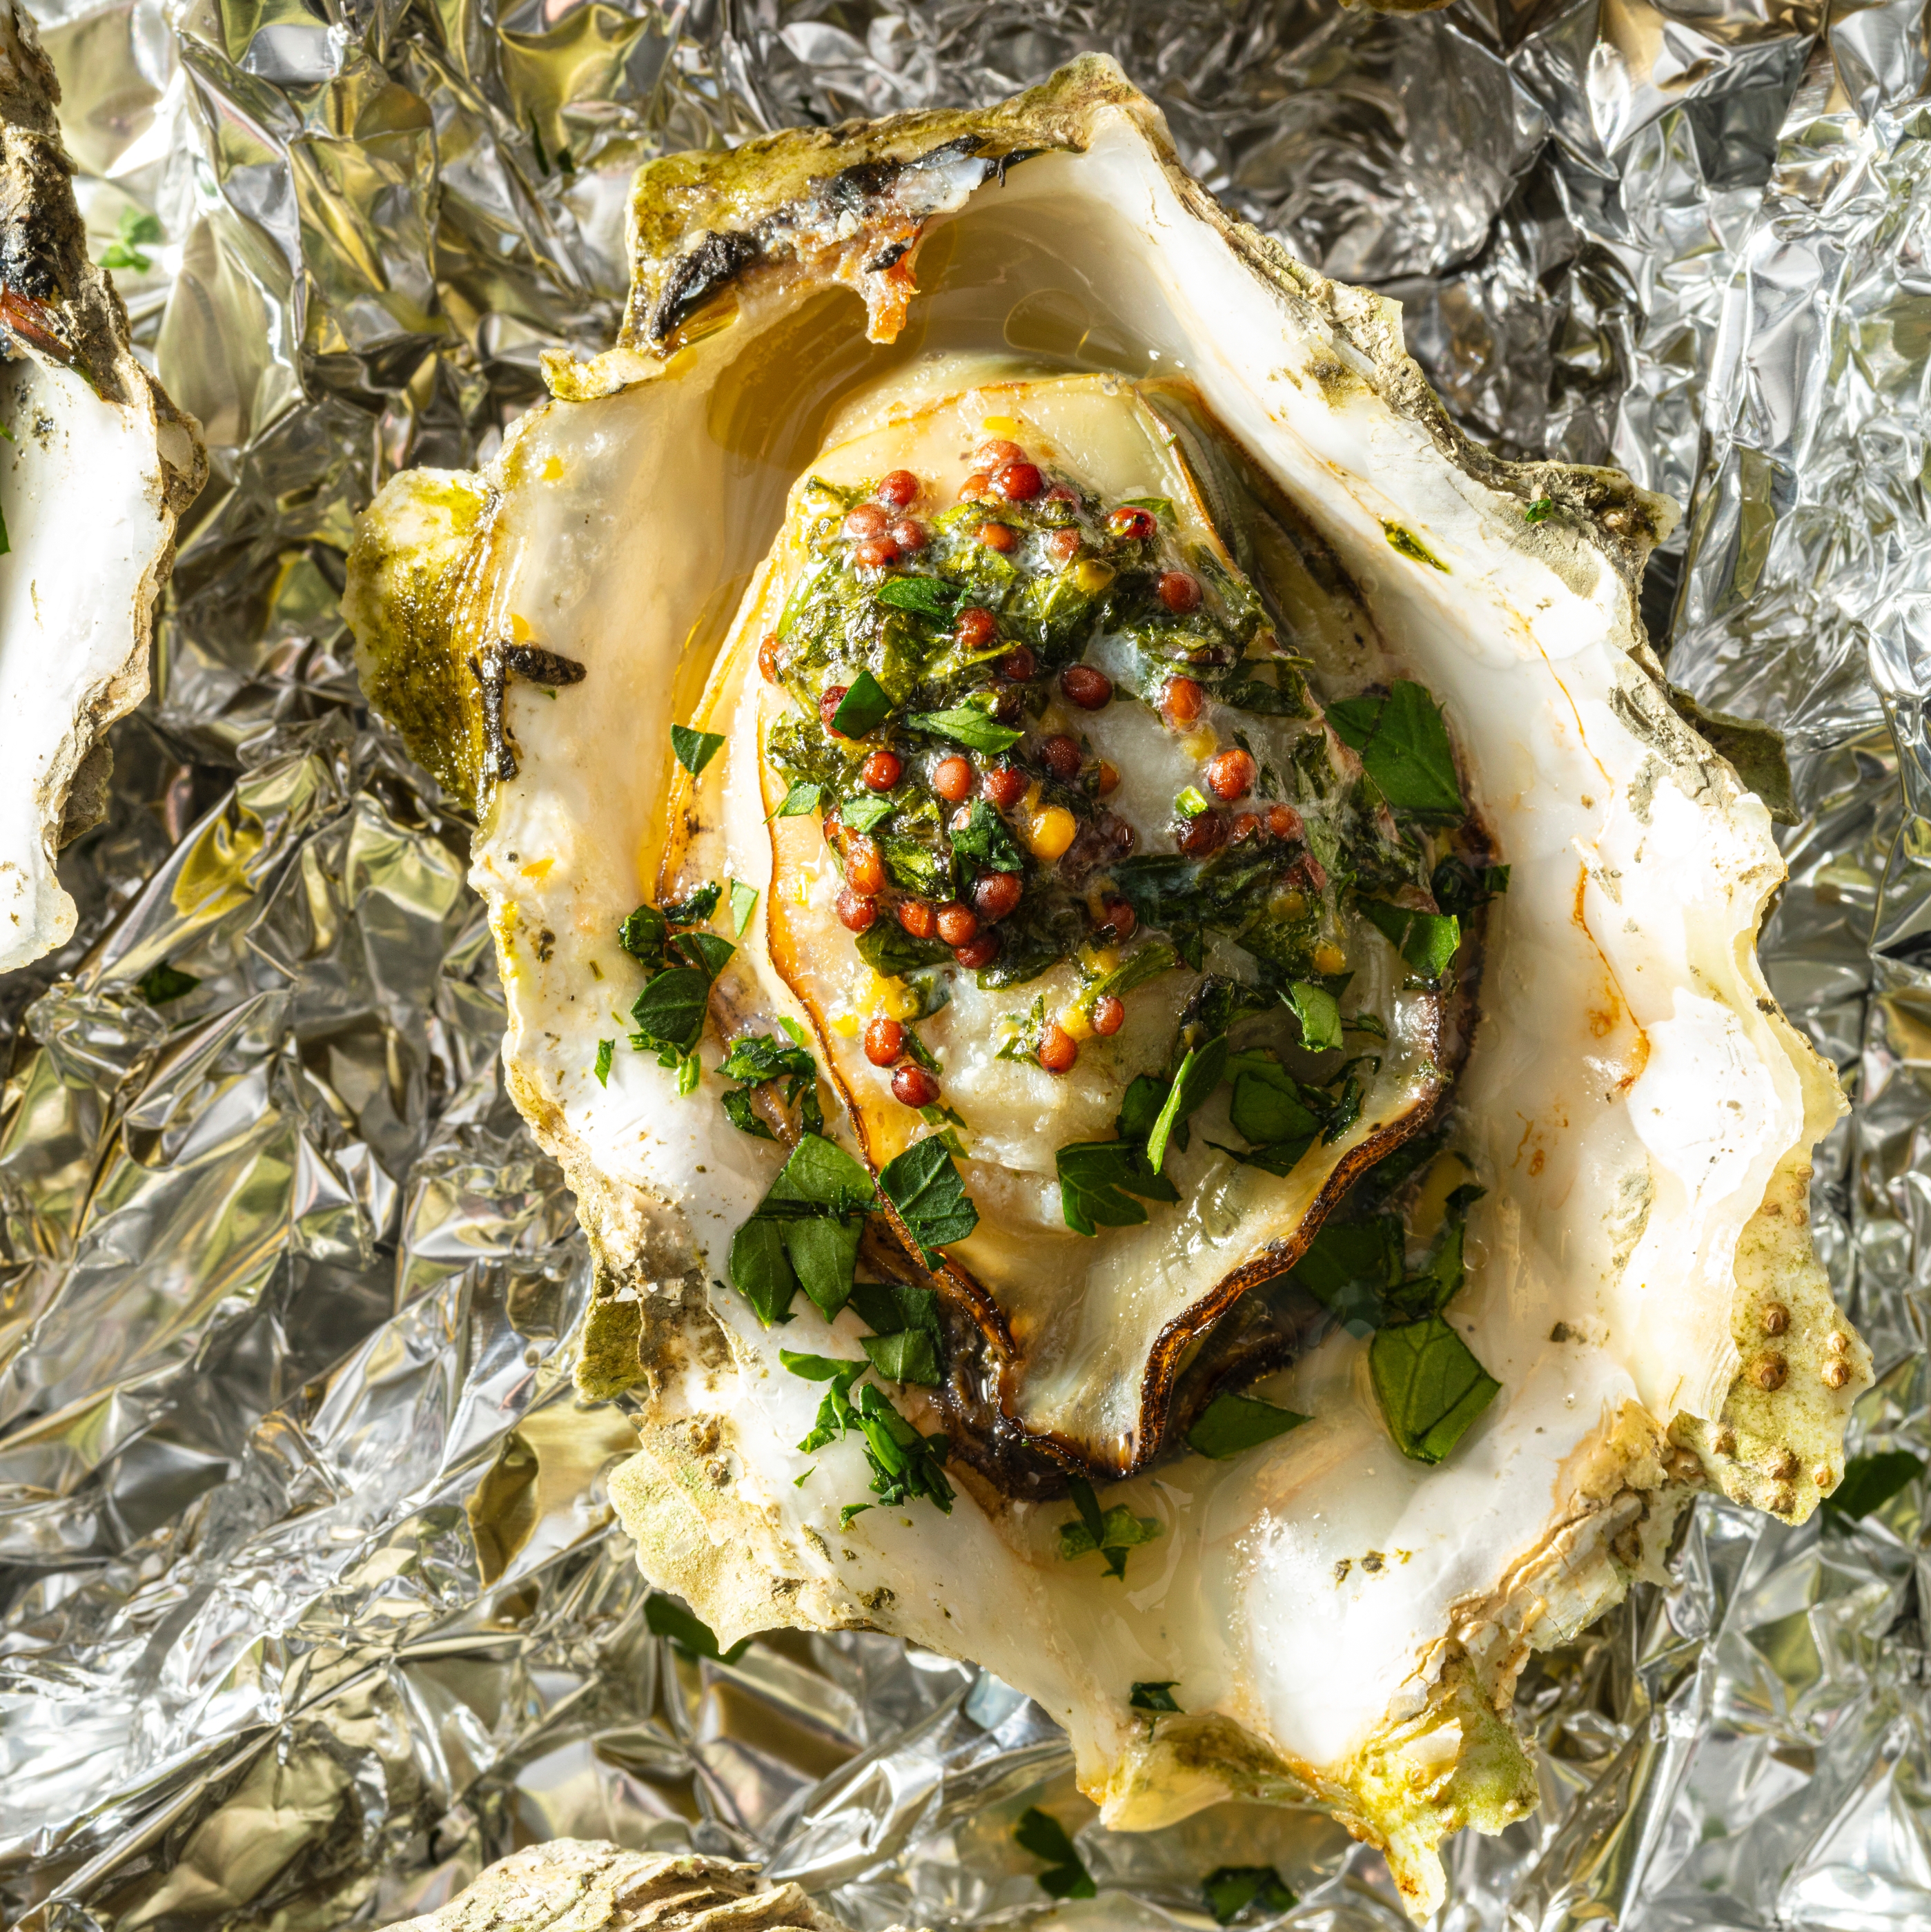 https://res.cloudinary.com/hksqkdlah/image/upload/SFS_Roasted_Oysters_on_the_Half_Shell_with_Mustard_Butter_444_xku1sq.jpg